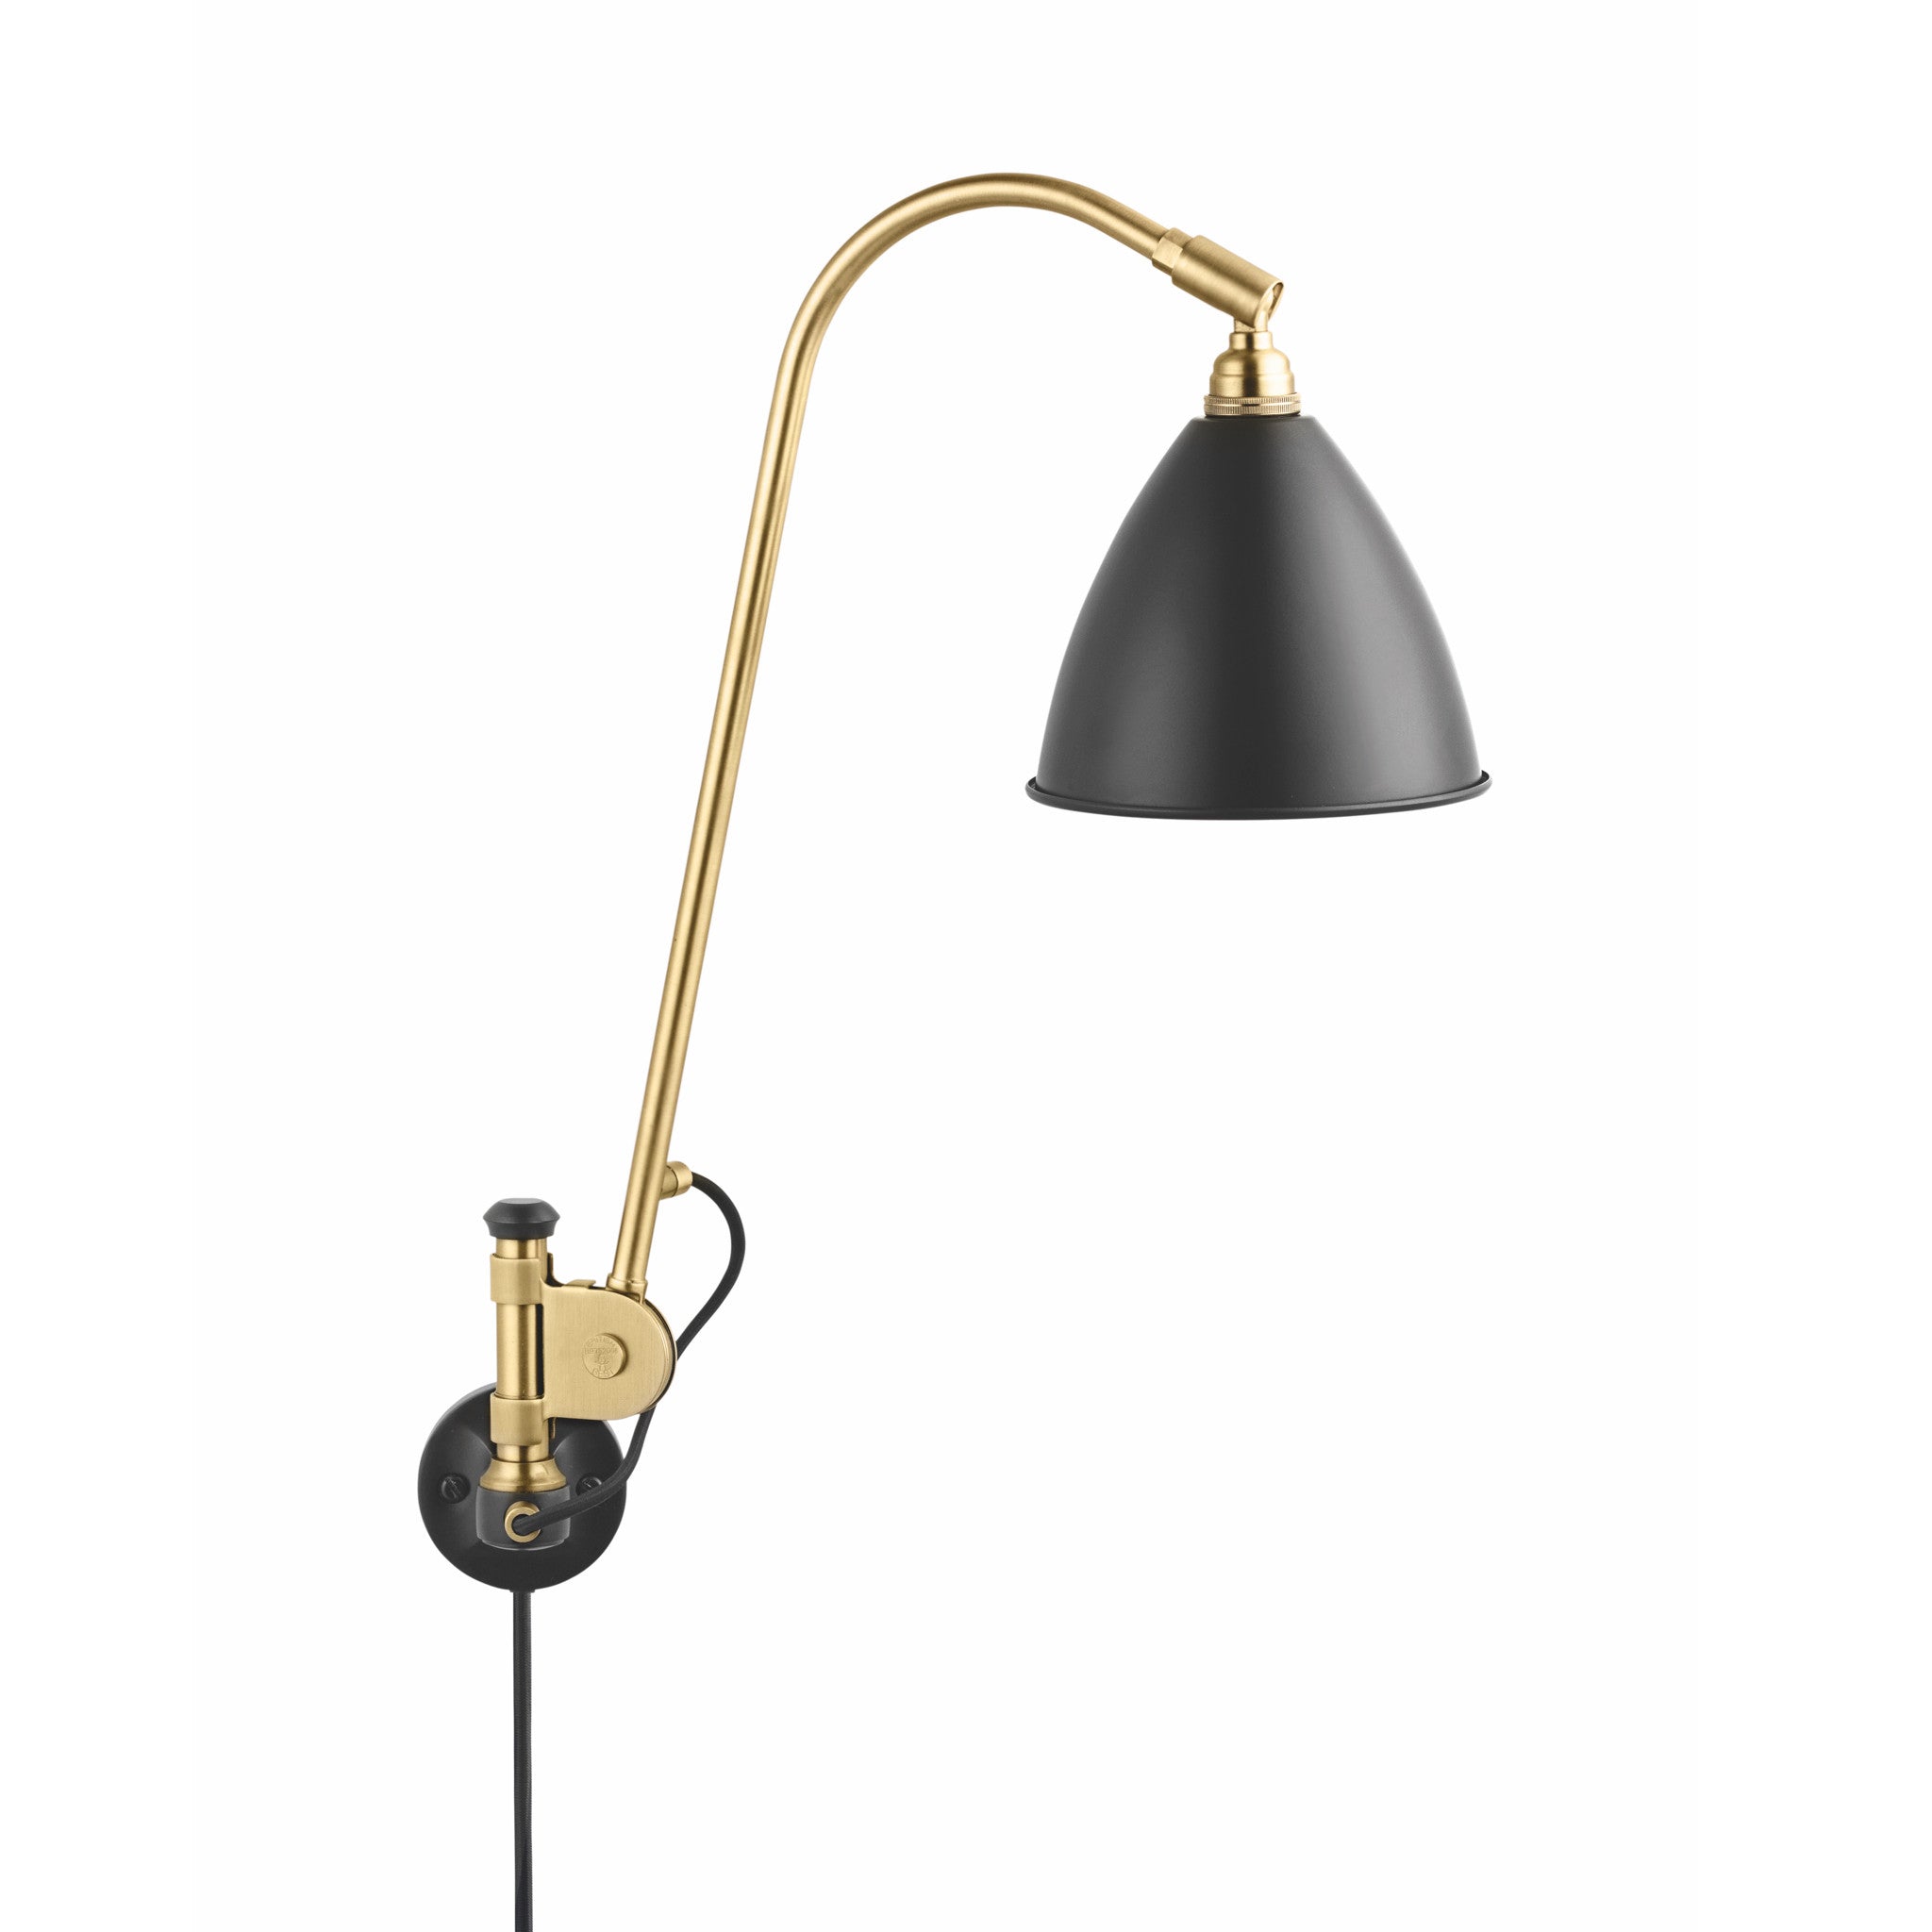 Bestlite BL6 Brass with Cable and Switch by Gubi